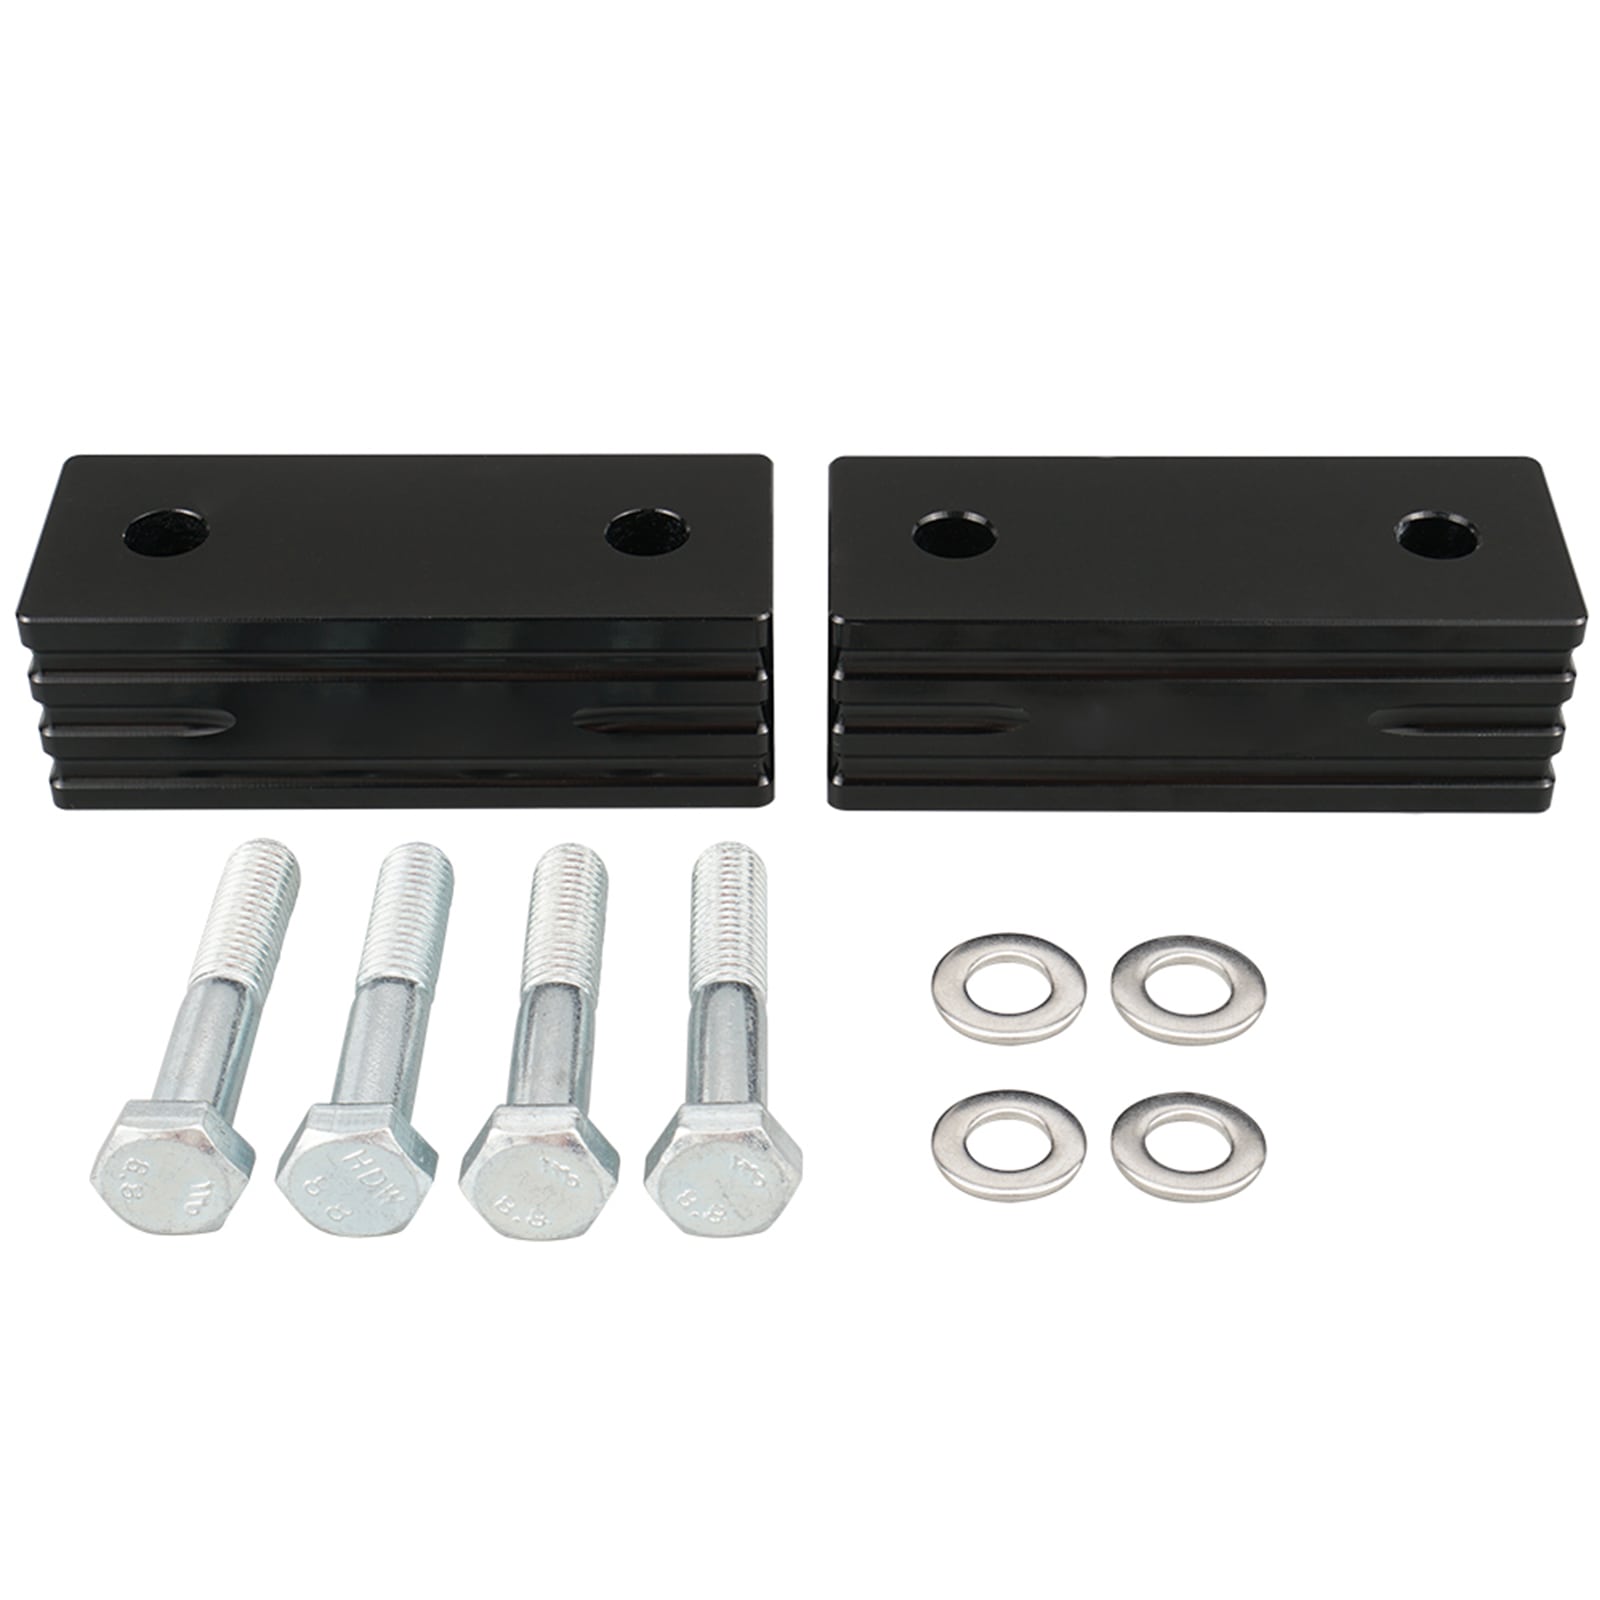 Hood Vent Space Riser Kit For Jeep Cherokee XJ 84-01